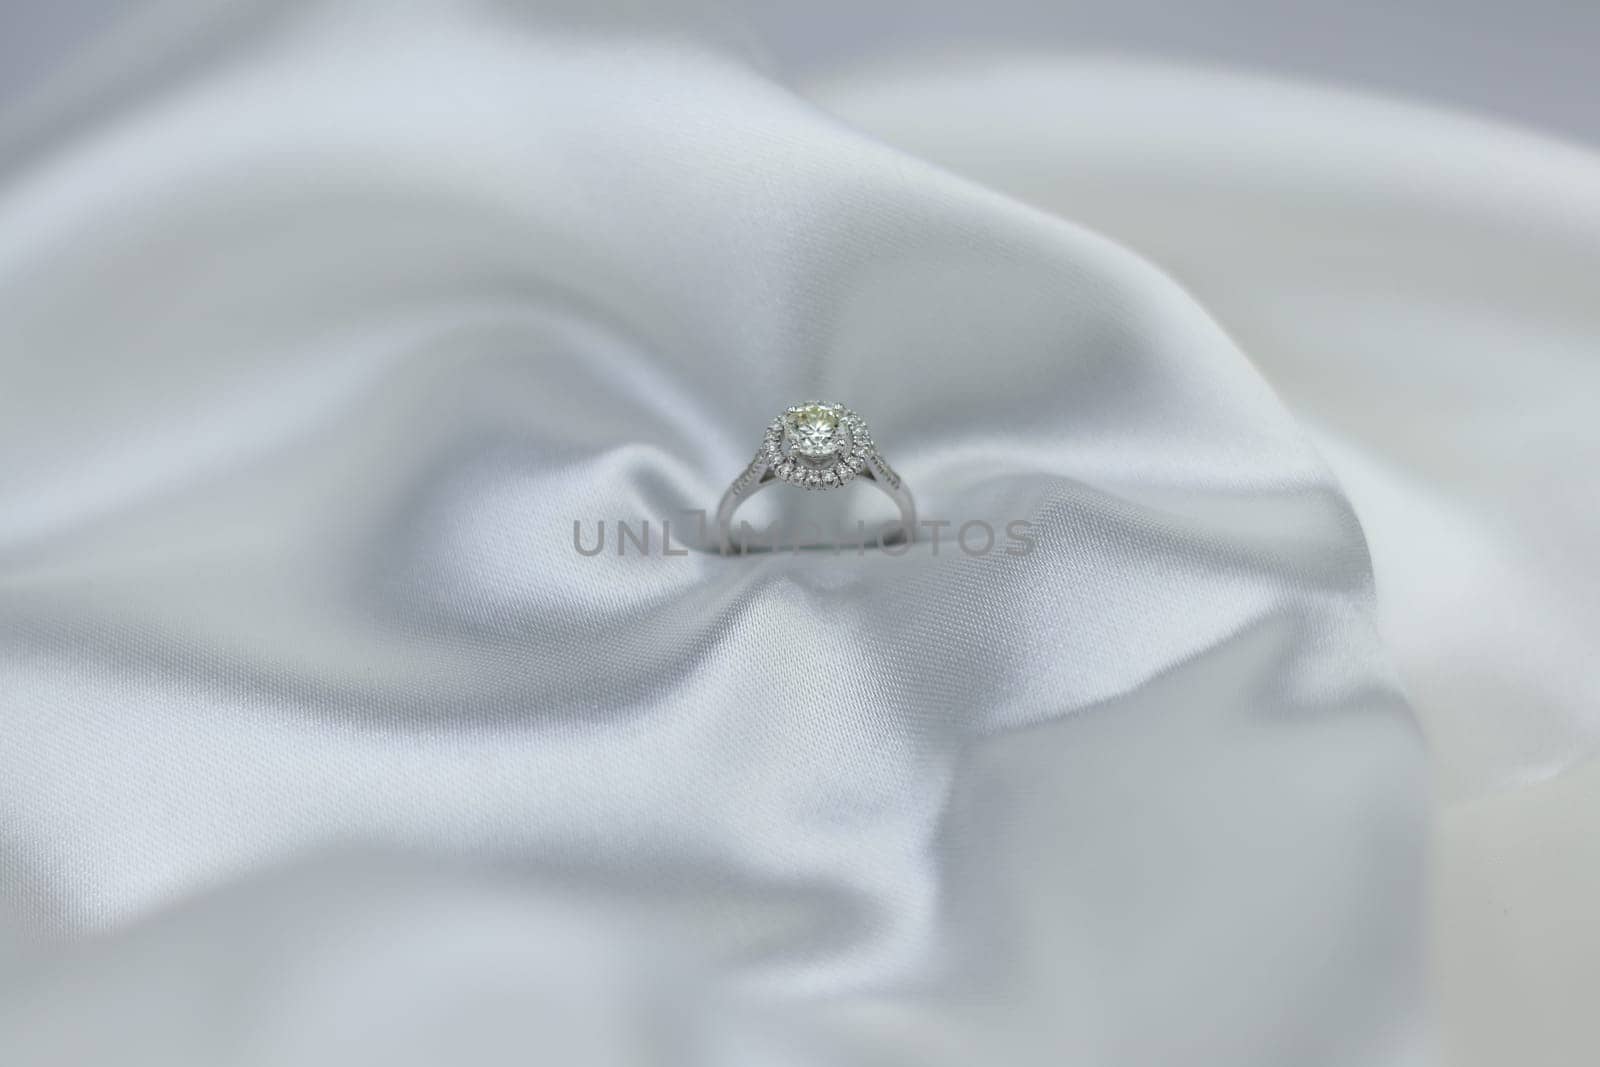 Luxury jewelryFine jewelry as diamond ring on white gold or platinum setting with red white fabric background. Jewelry shop concept